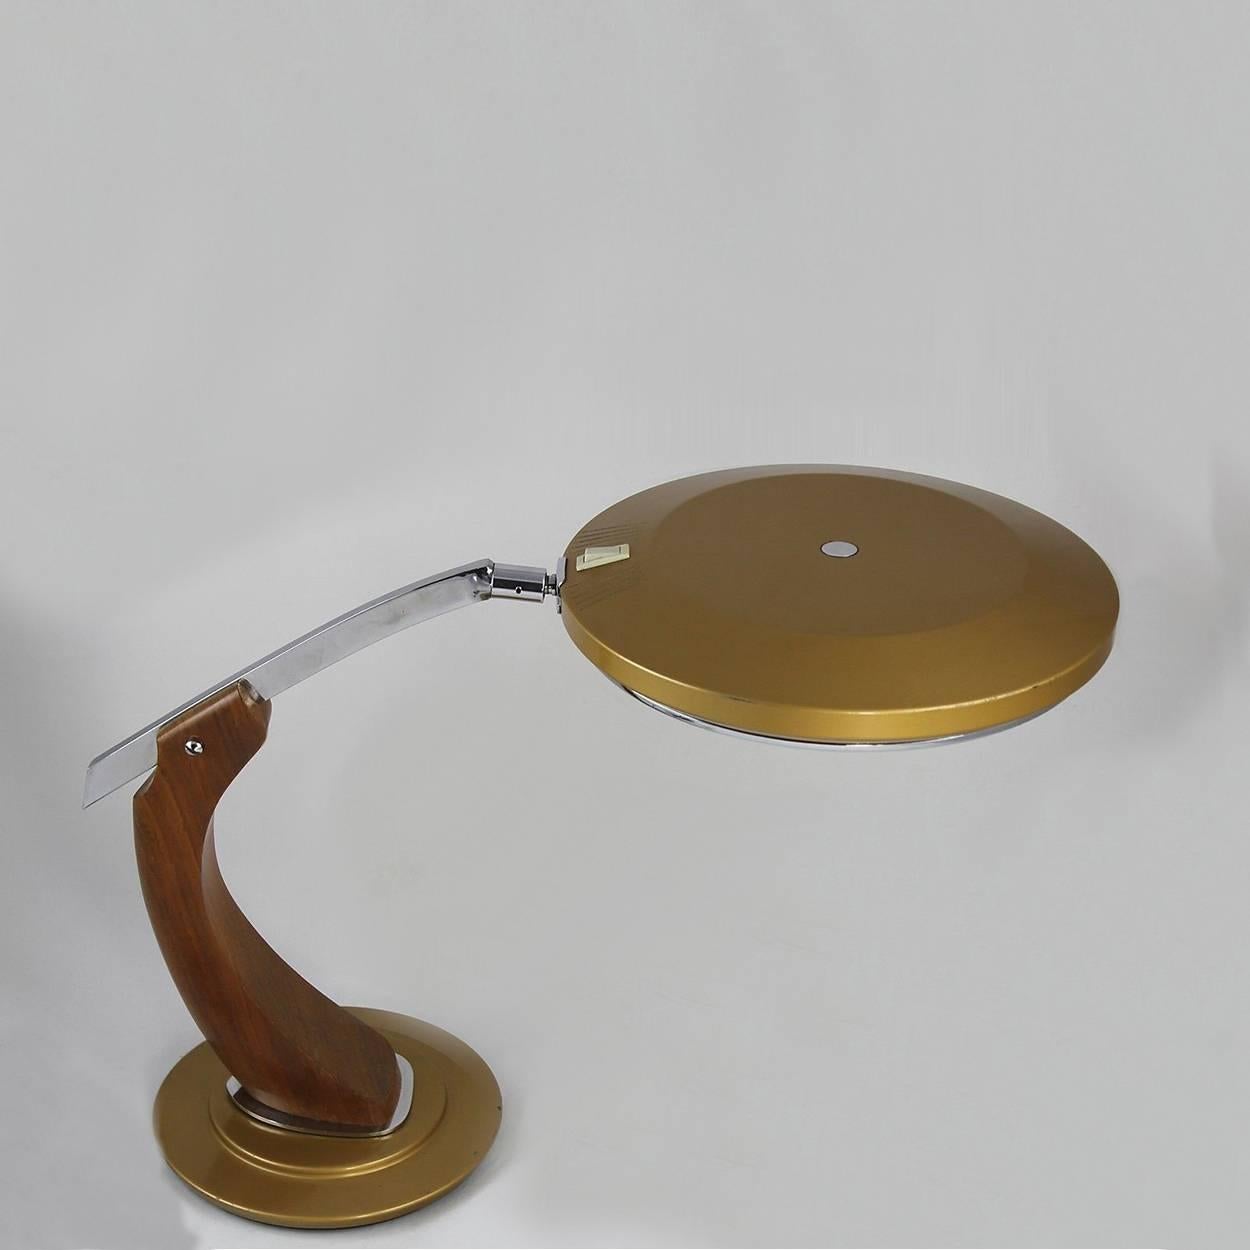 Spanish Fase Madrid Midcentury Oak and Gold Desk Lamp, 1960s For Sale